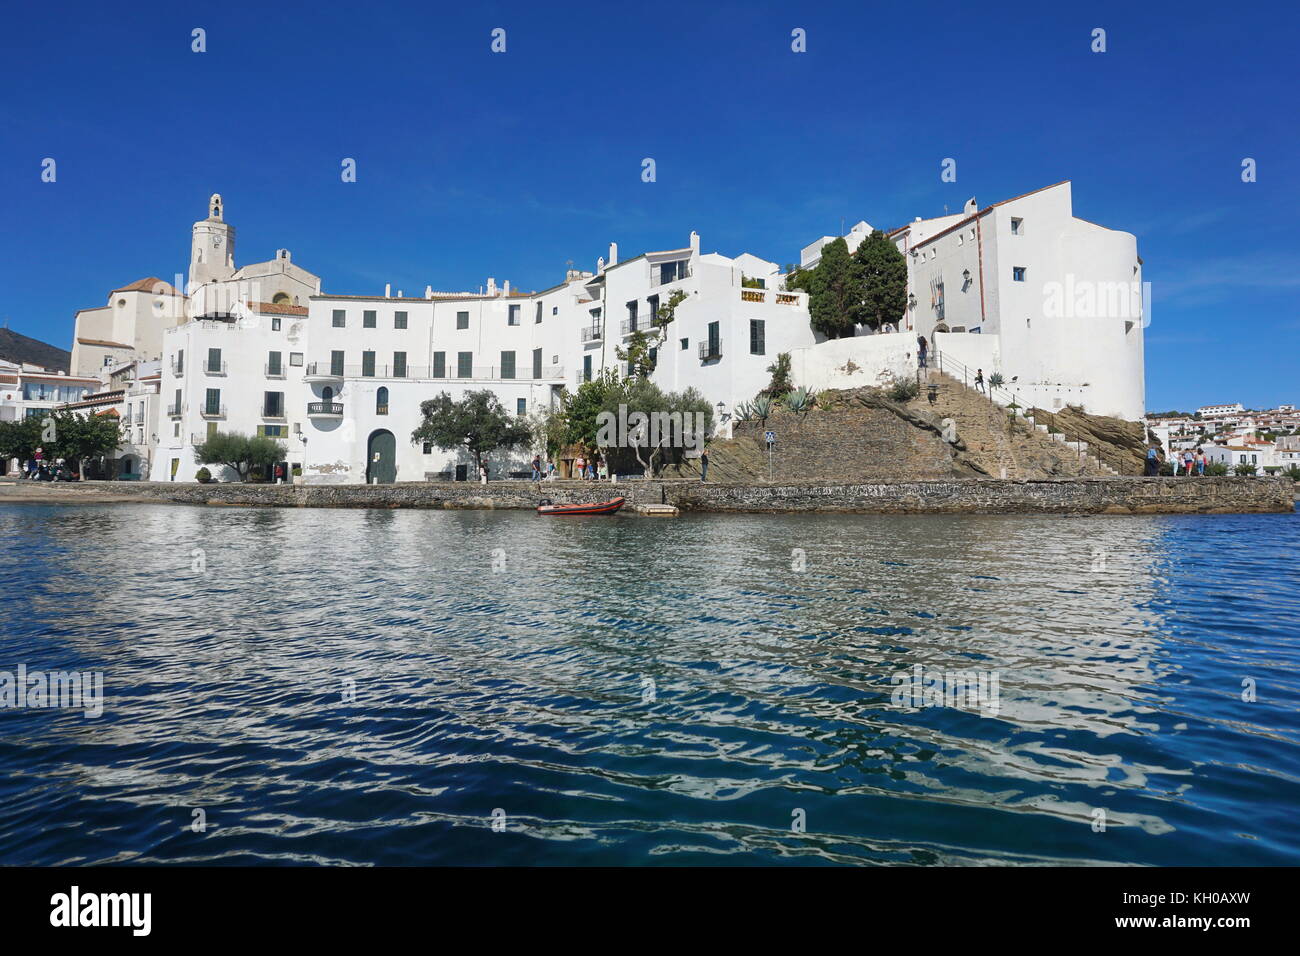 Spain Cadaques old village with whitewashed houses on the coast of the Mediterranean sea, Costa Brava, Alt Emporda, Catalonia Stock Photo